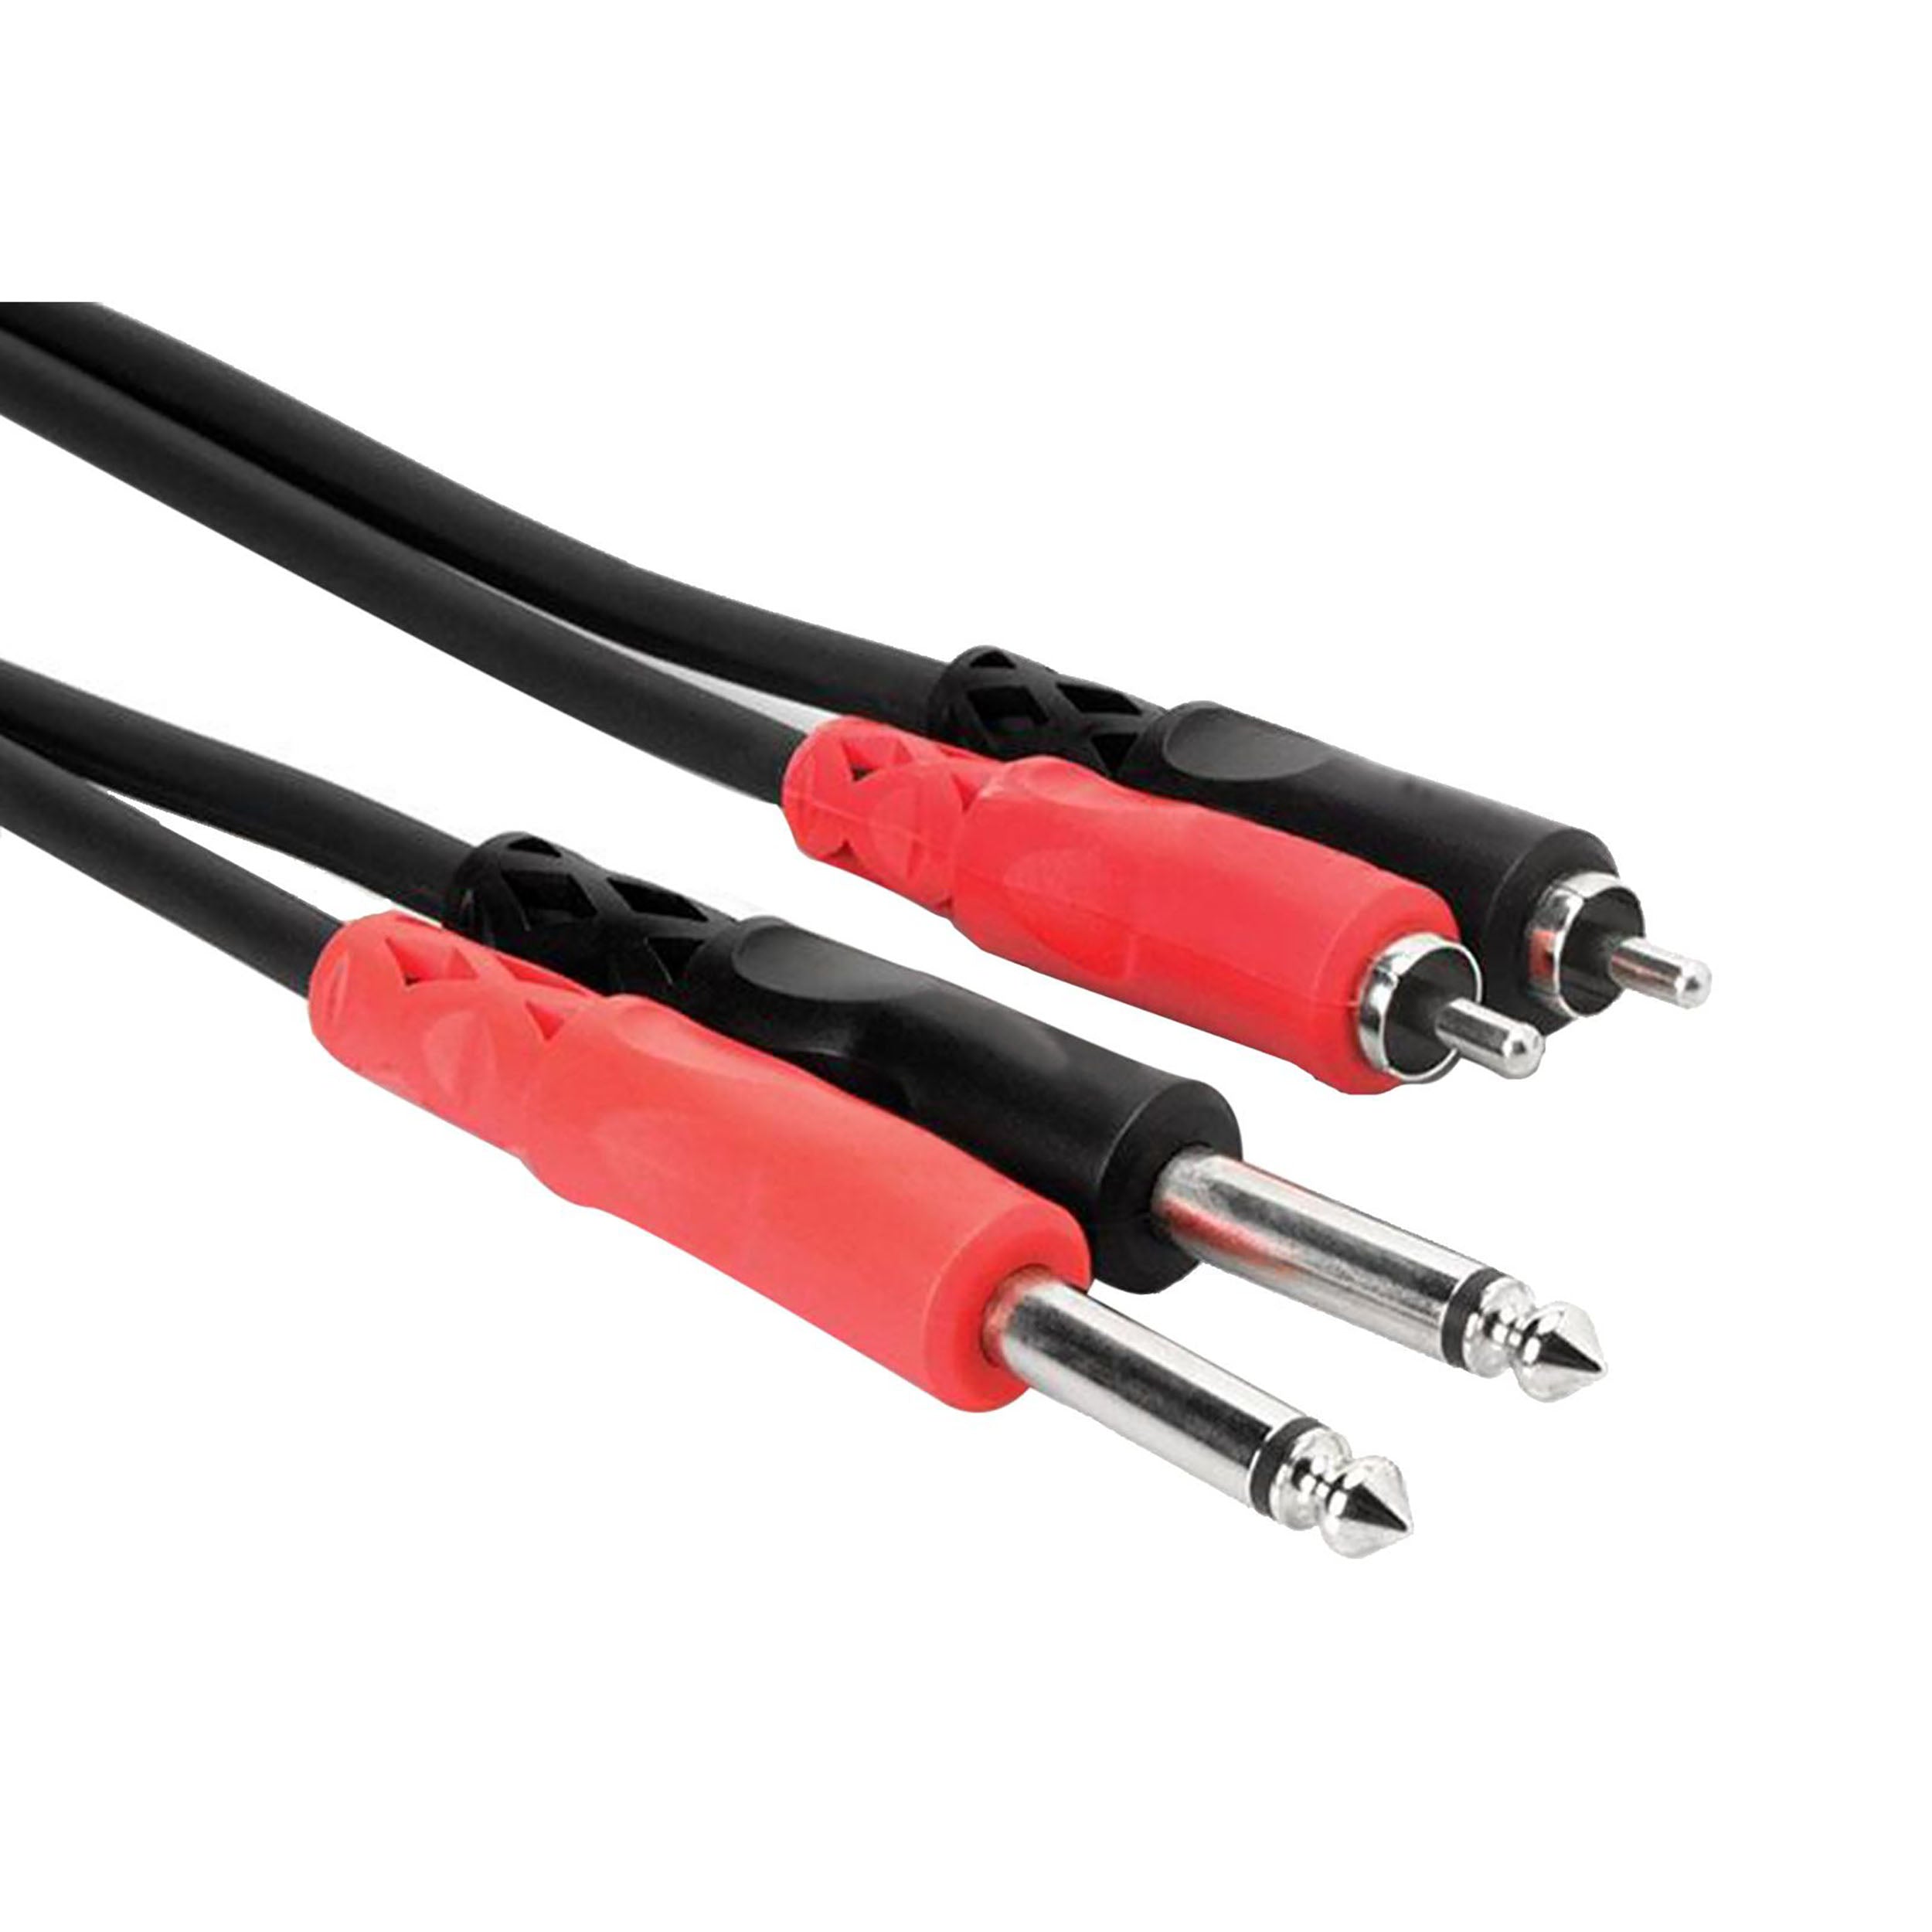 Accu-Cable RC4-12, Dual RCA to Dual 1/4" Cable 12 - Ft by Accu Cable